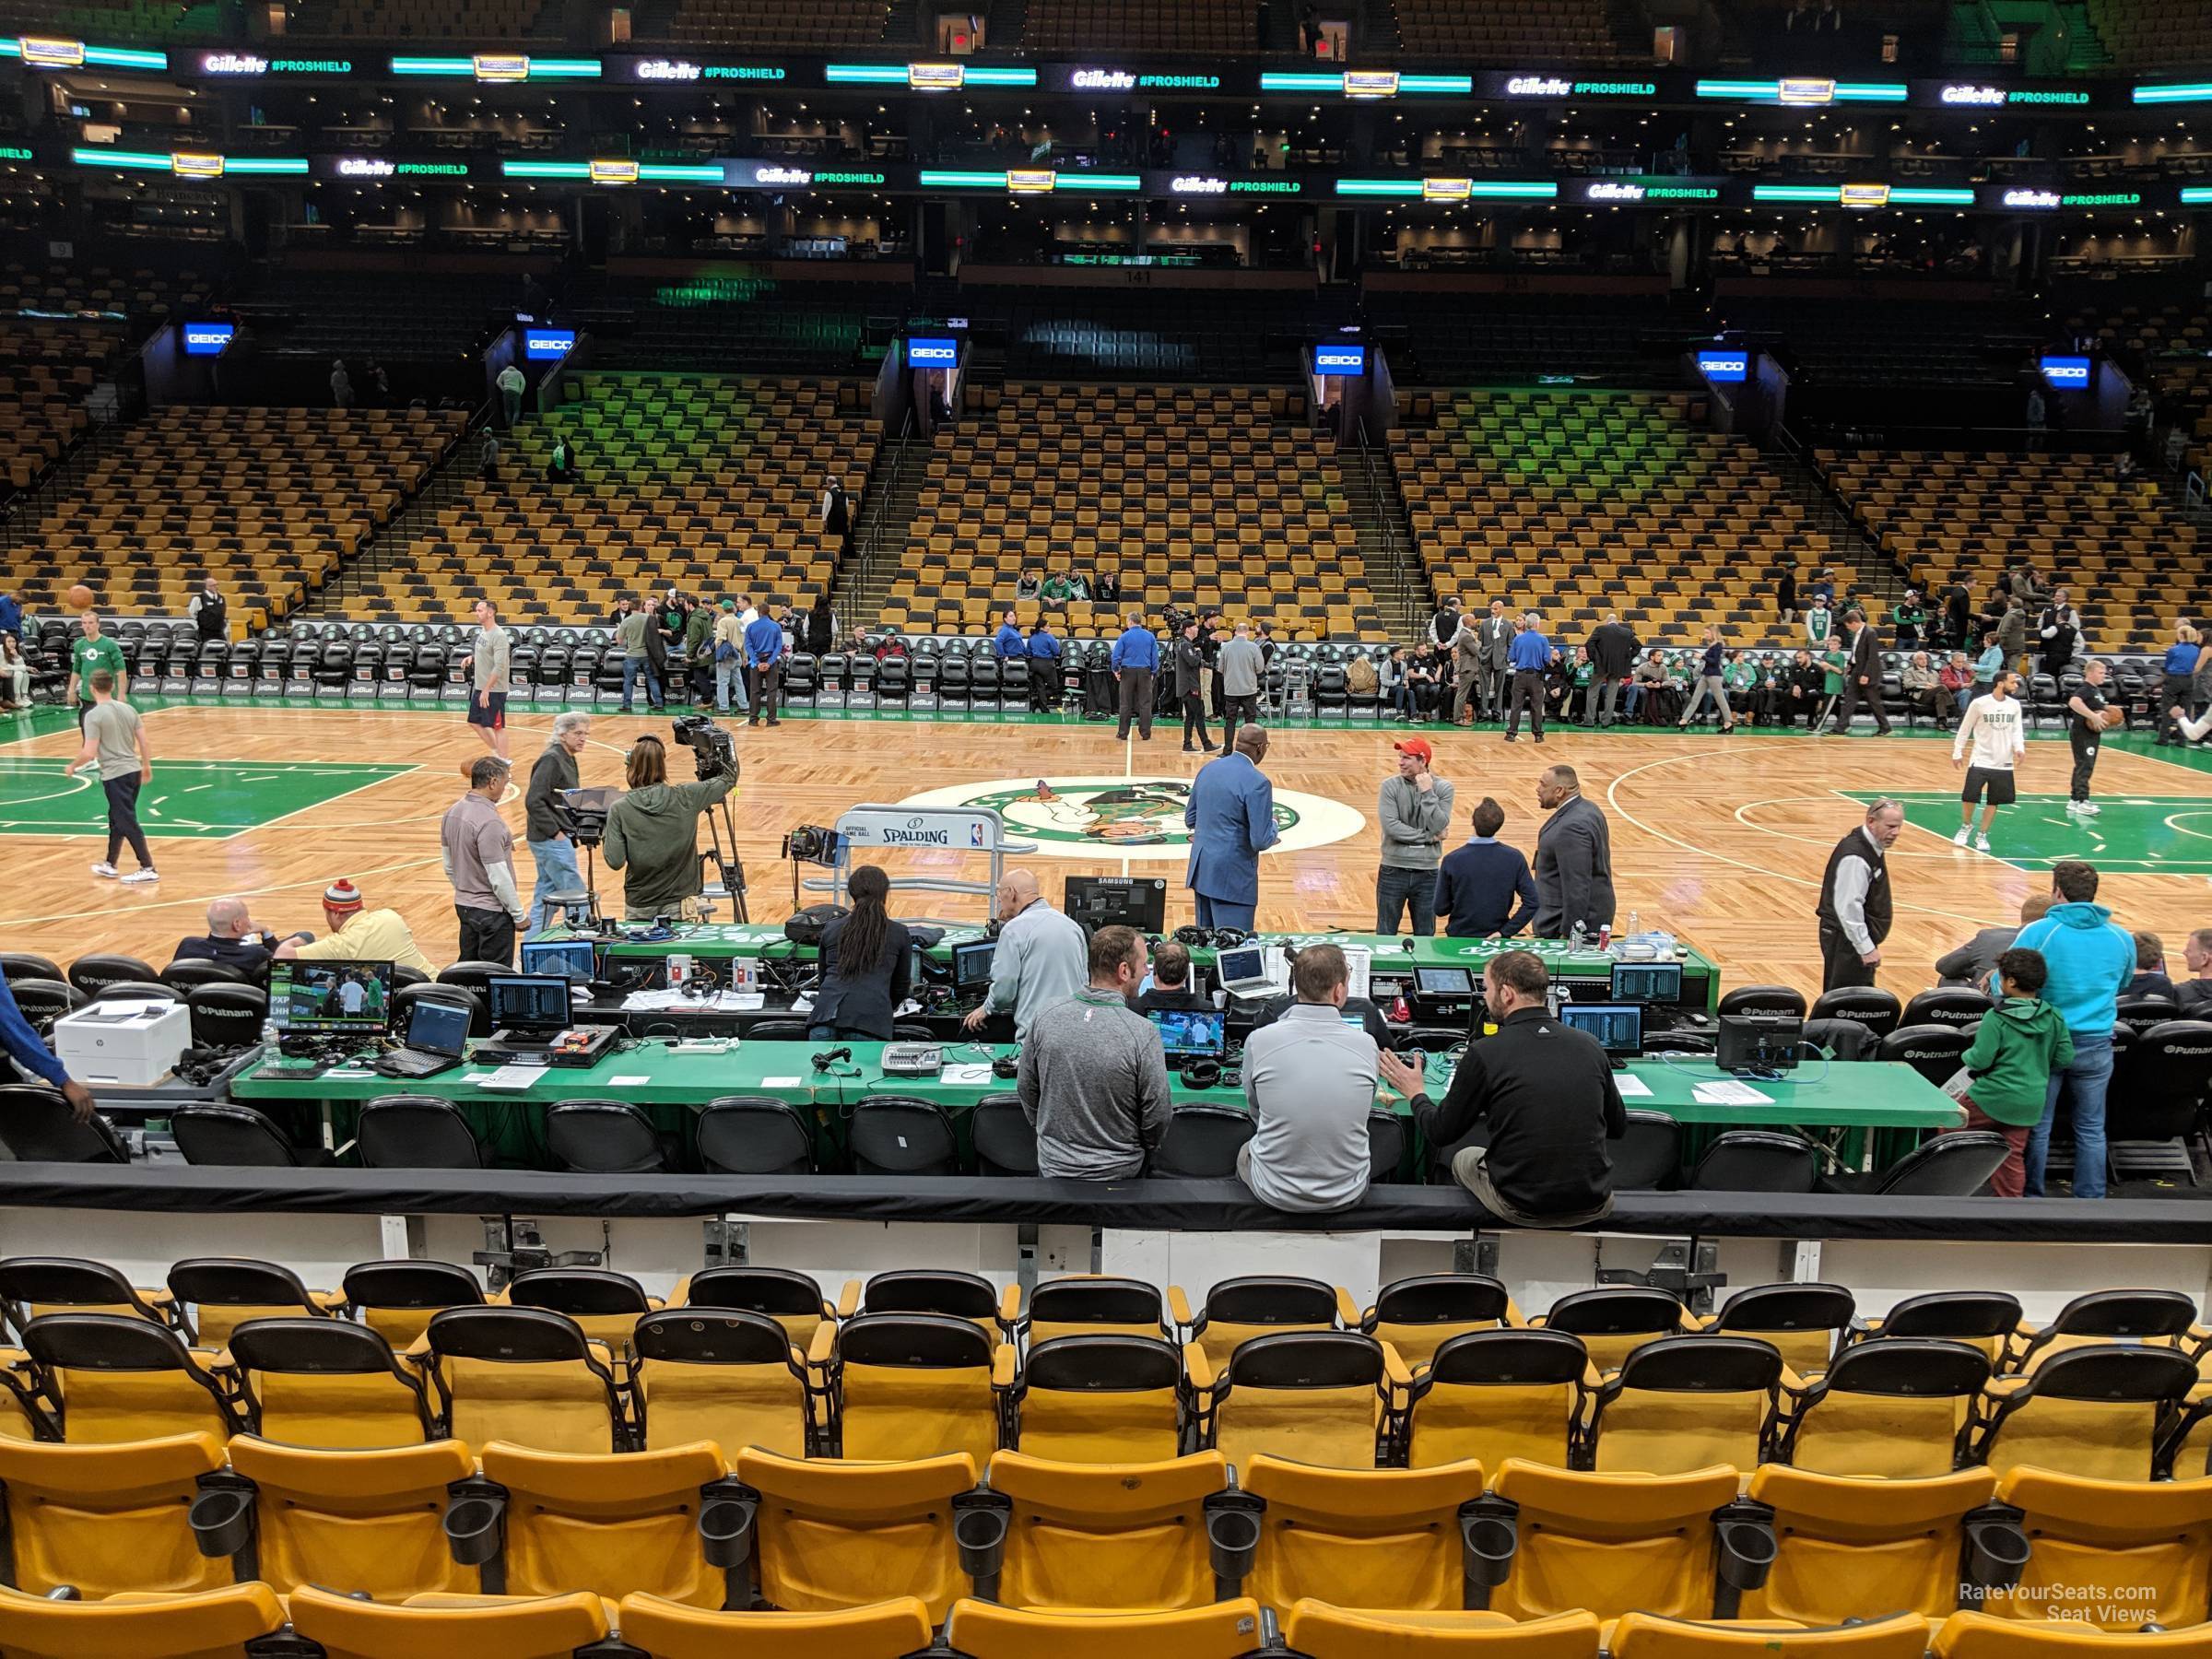 loge 1, row 7 seat view  for basketball - td garden